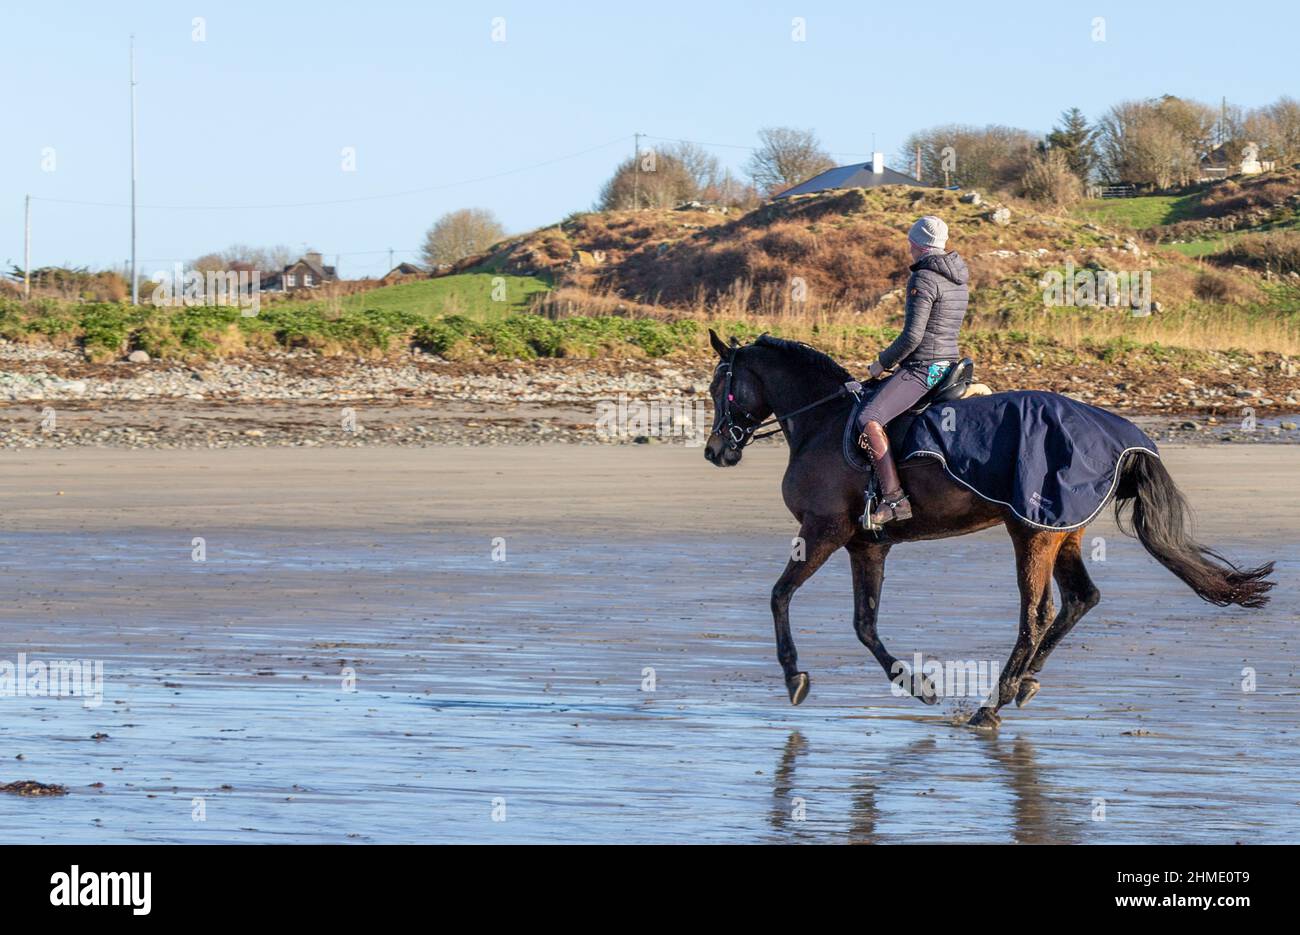 Woman in Silhouette or backlit riding horse through surf Stock Photo